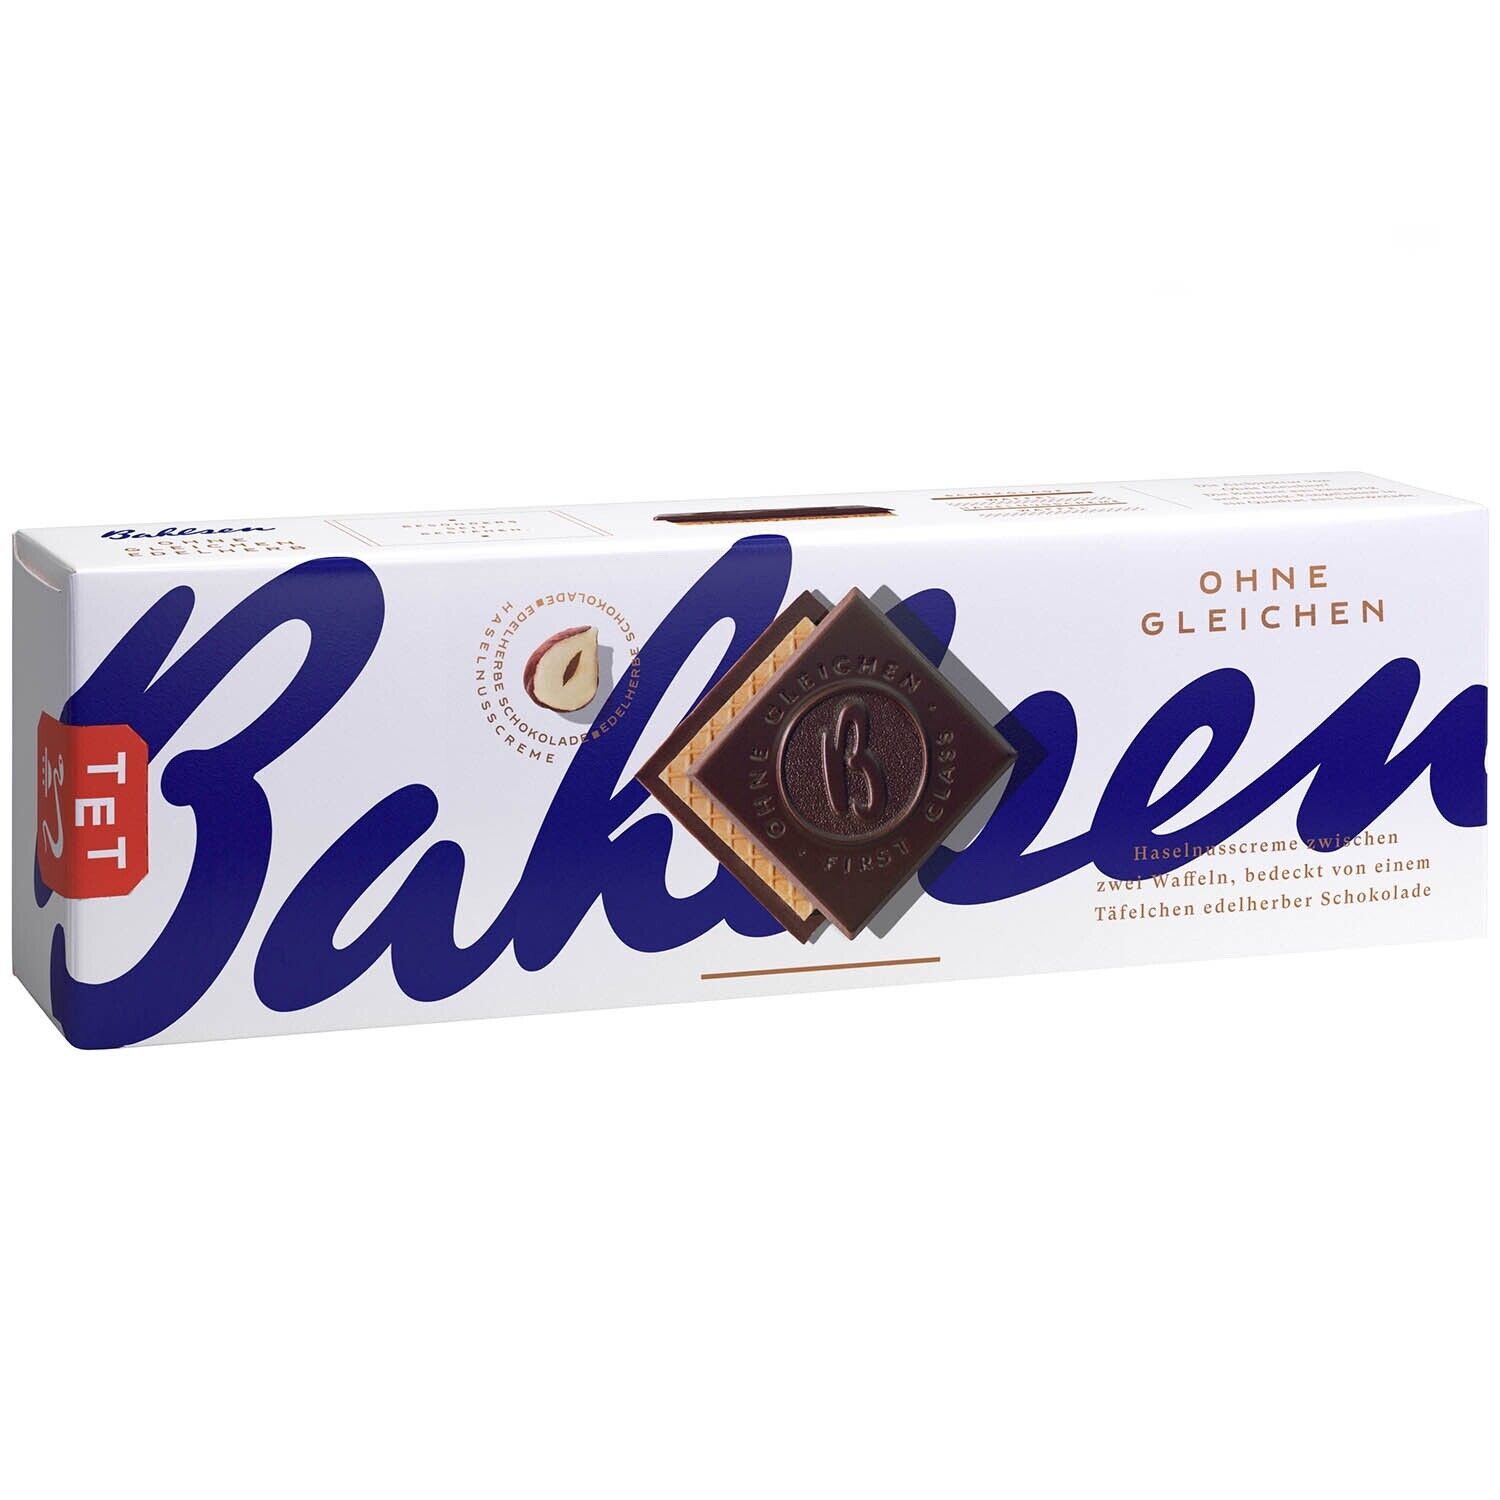 Bahlsen Waffle cookies with NOUGAT cream and DARK chocolate -125g-FREE SHIP- - $9.85